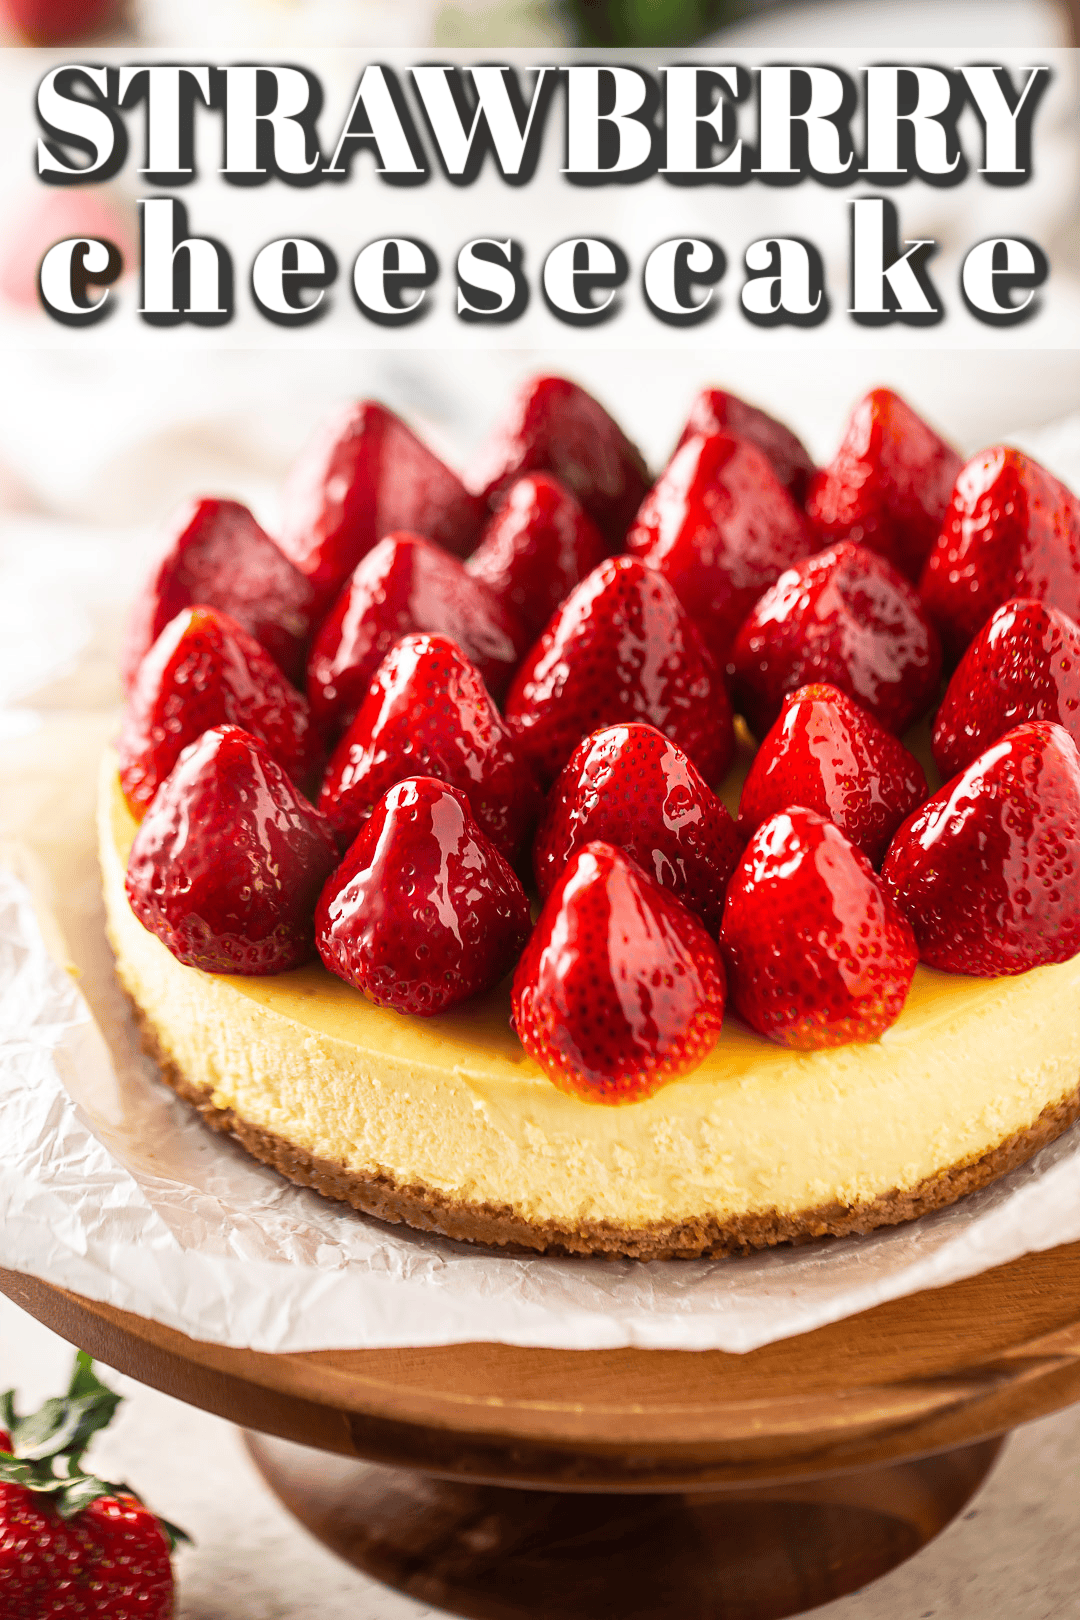 Strawberry cheesecake recipe baked, topped and presented on a light background.